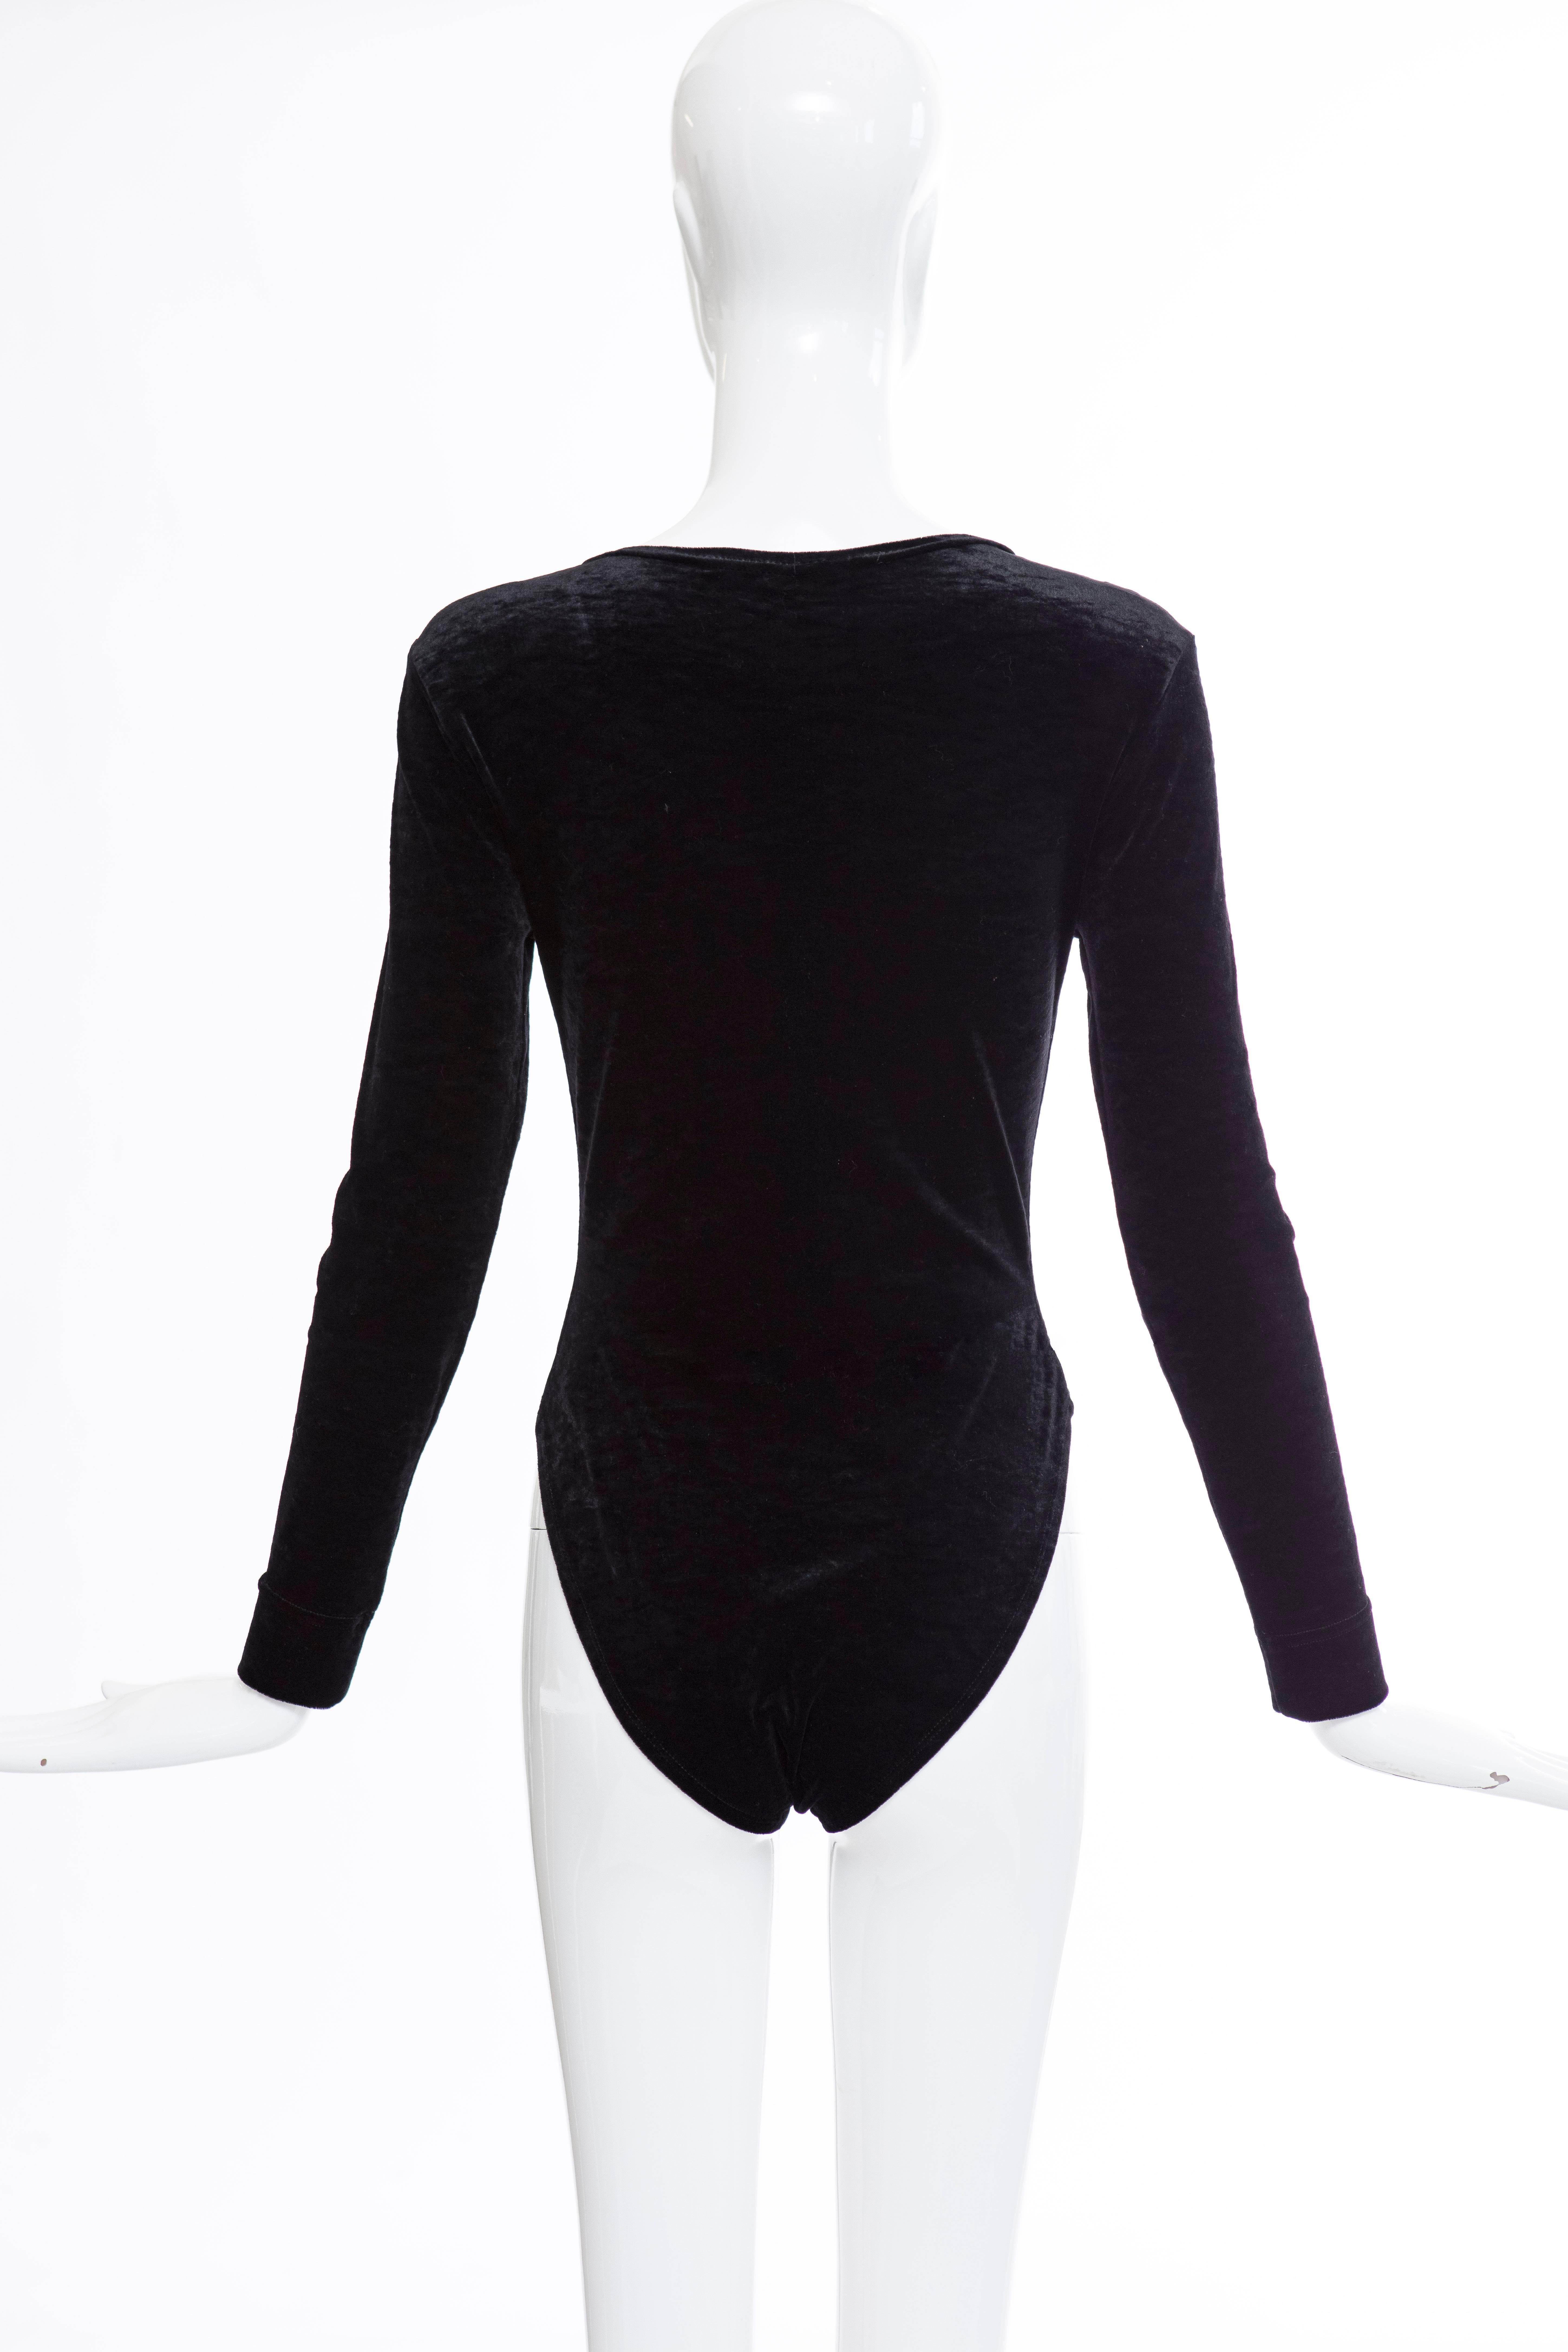 Cheap And Chic By Moschino Black Nylon Spandex Velvet Bodysuit, Early 2000s In Excellent Condition For Sale In Cincinnati, OH